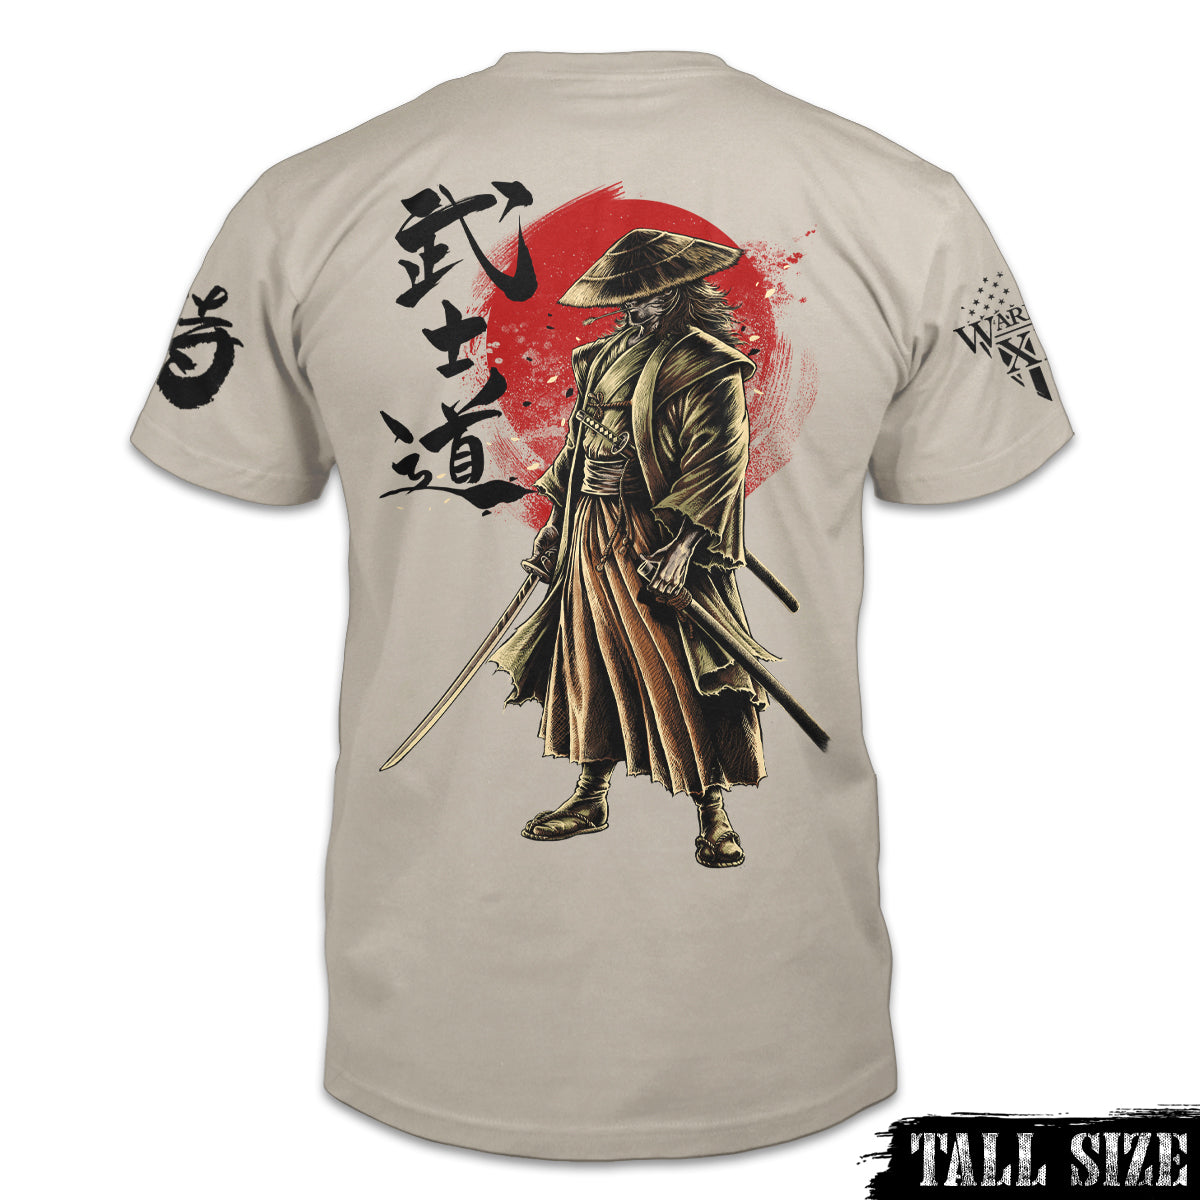 A samurai warrior printed on the back of a light tan tall size shirt.